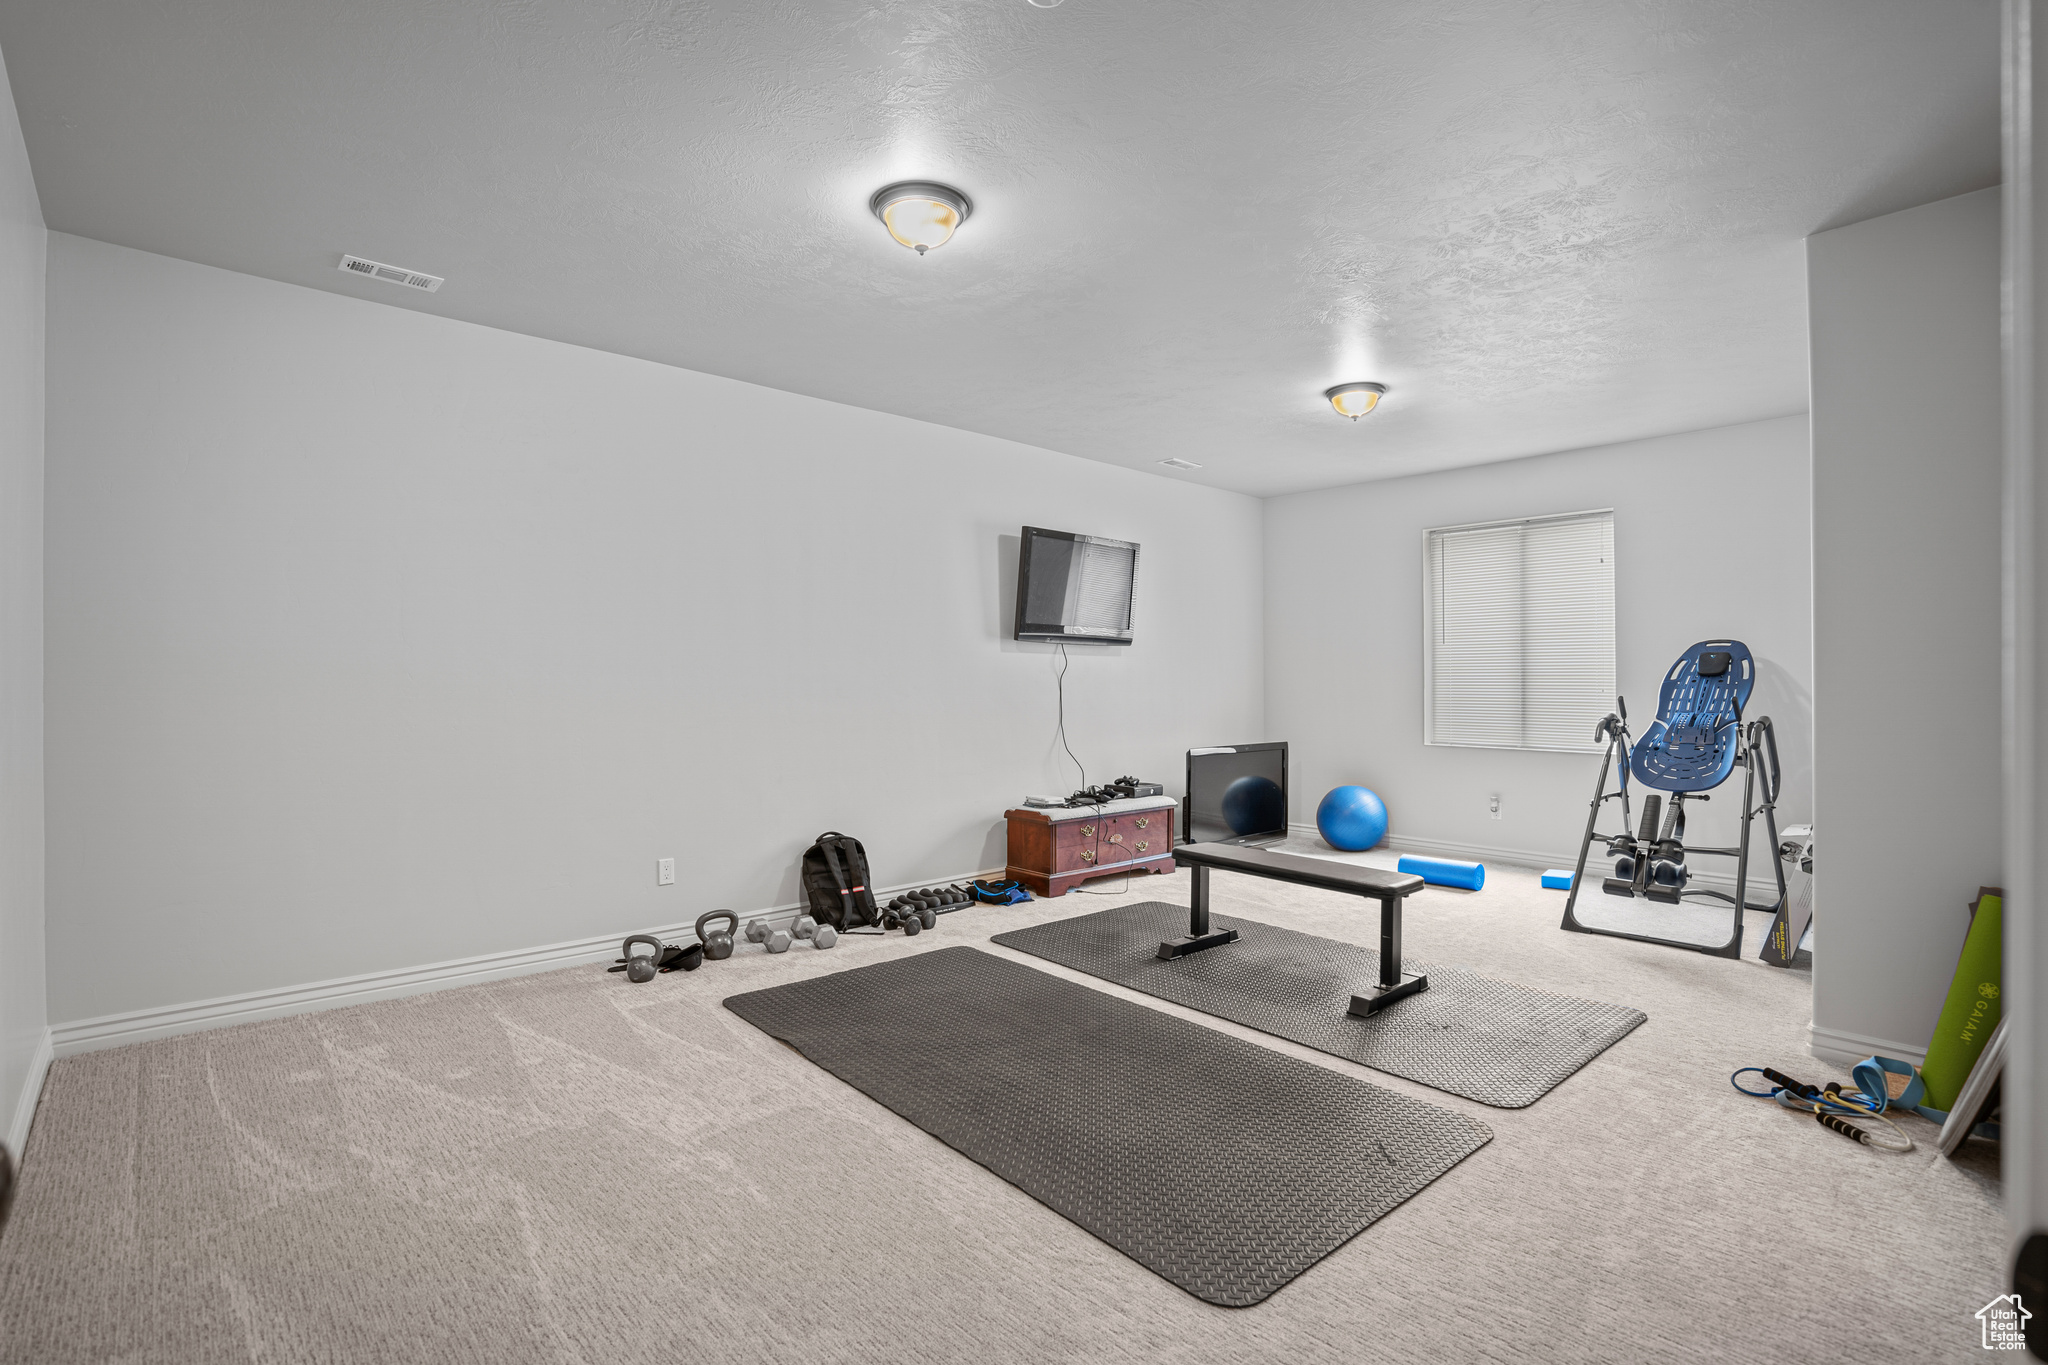 Workout area with carpet floors